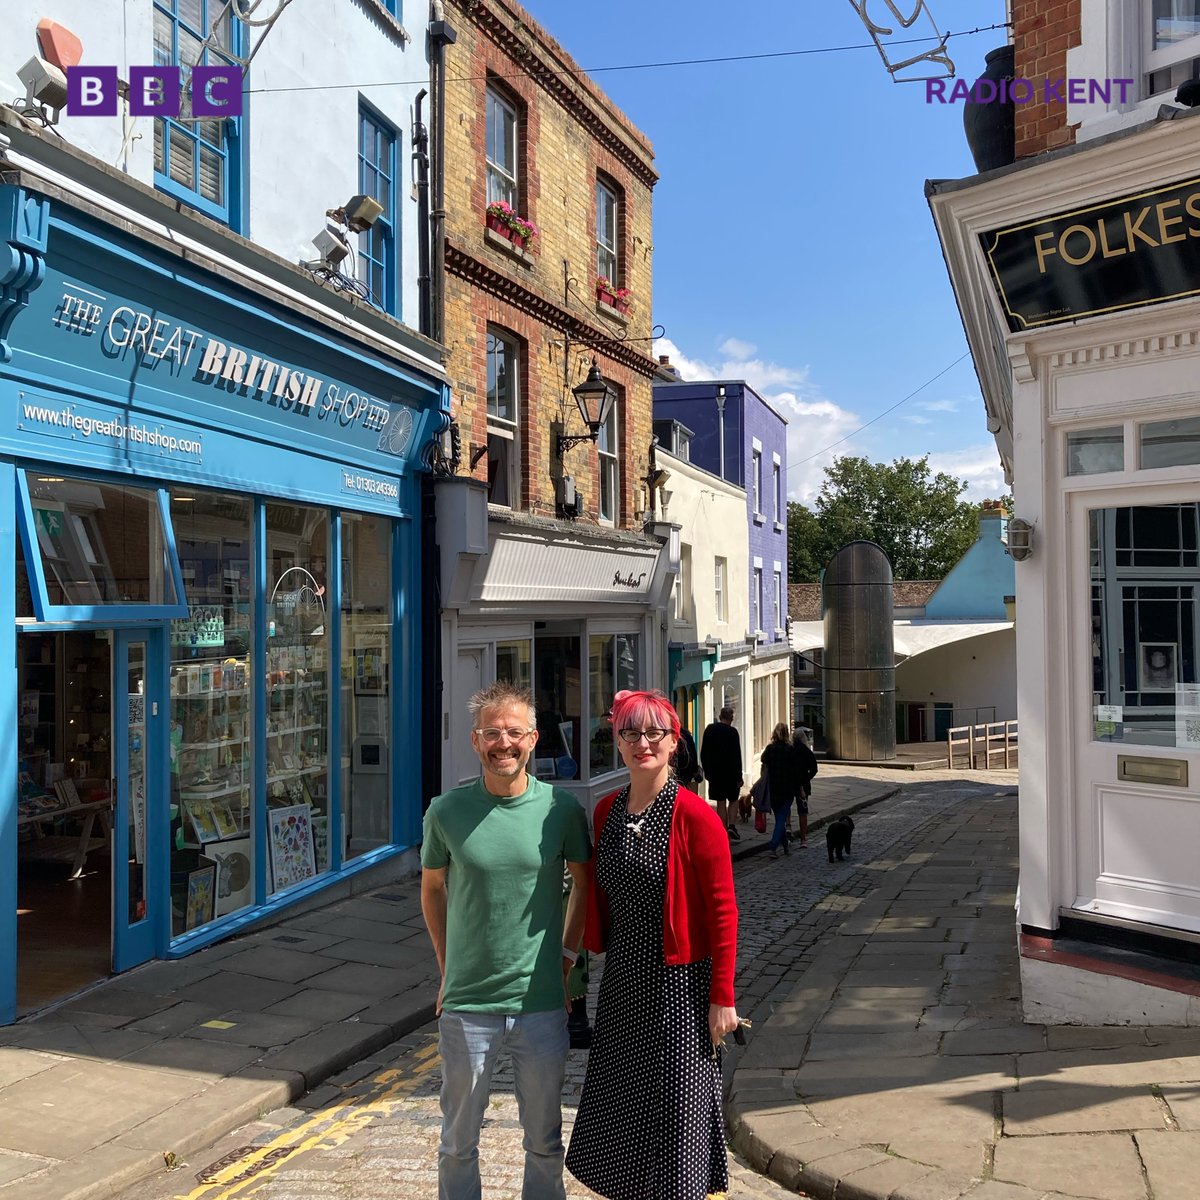 At 1140…. We’re in Folkestone getting a guide to the #CreativeQuarter with local artists @shanerecord & @2quirkybirds